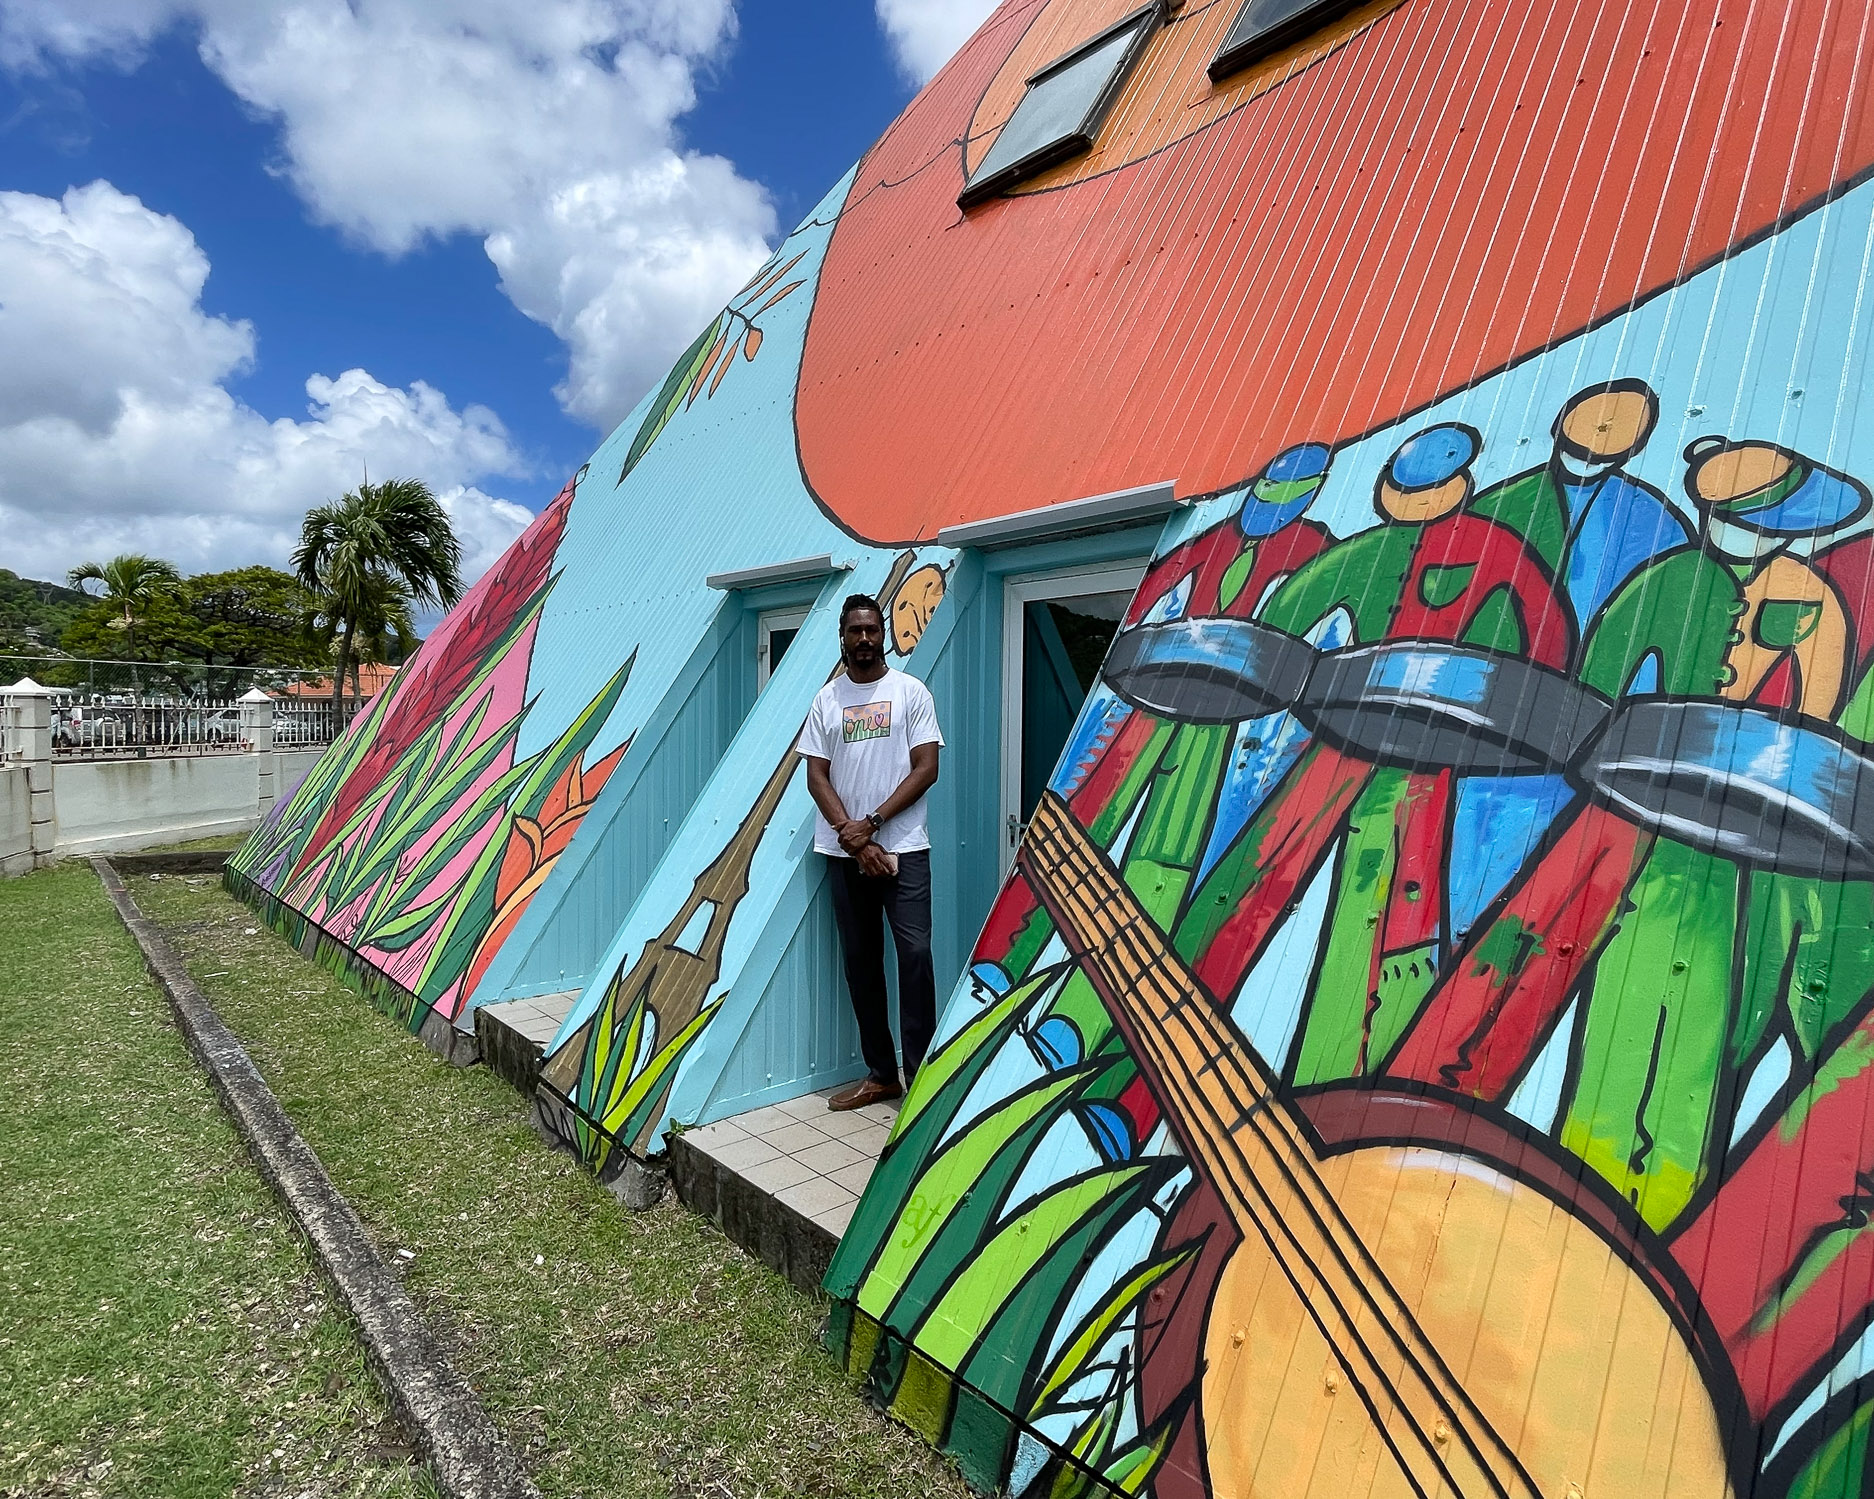 Saint Lucia artists – where to find galleries, artists and murals in St Lucia